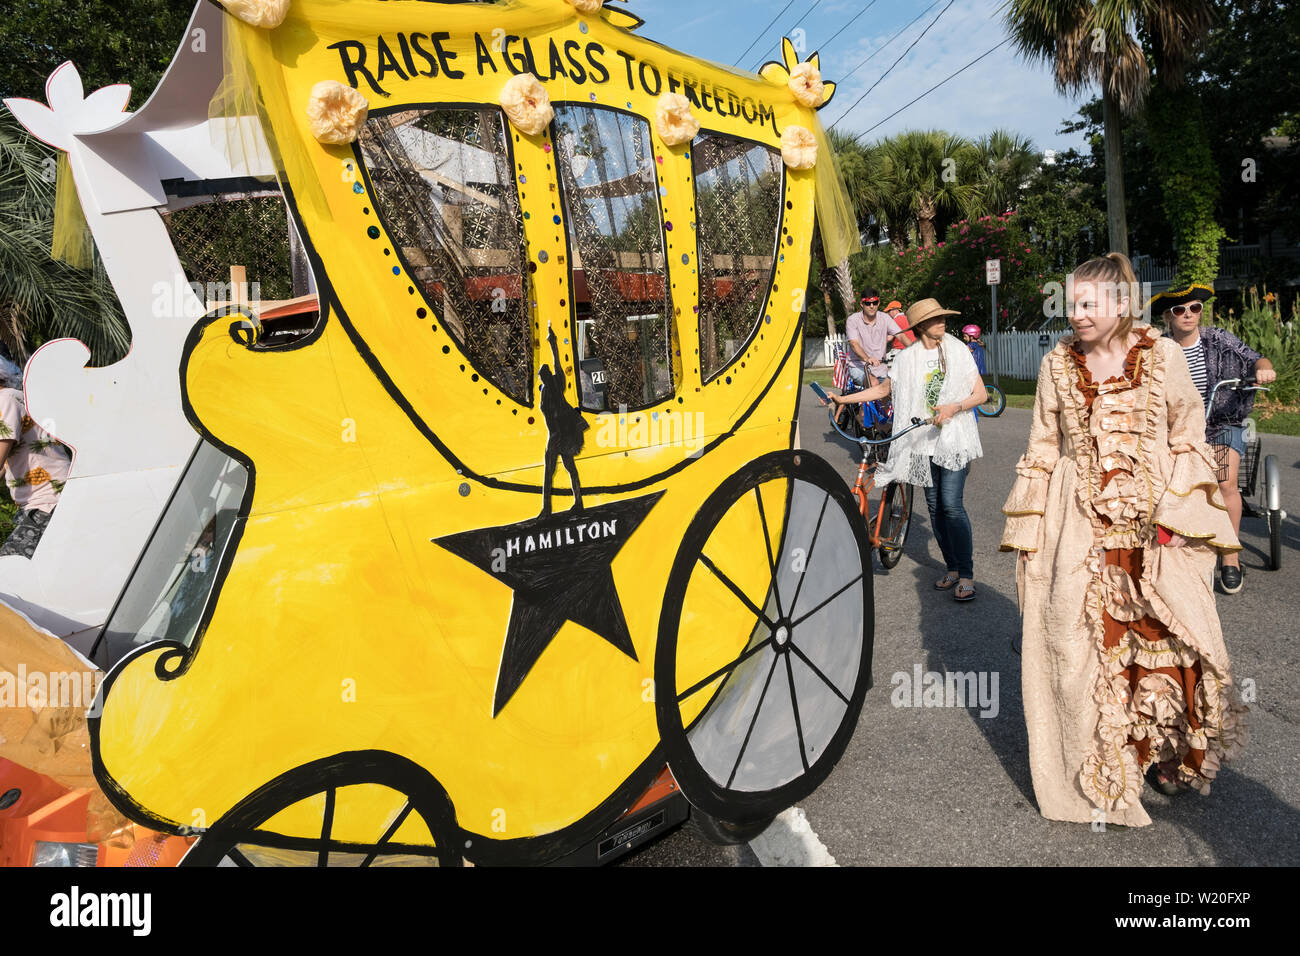 Women wearing colonial costume walk alongside a golf cart decorated as a horse carriage during the annual Independence Day parade July 4, 2019 in Sullivan's Island, South Carolina. The tiny affluent Sea Island beach community across from Charleston holds an outsized golf cart parade featuring more than 75 decorated carts. Stock Photo